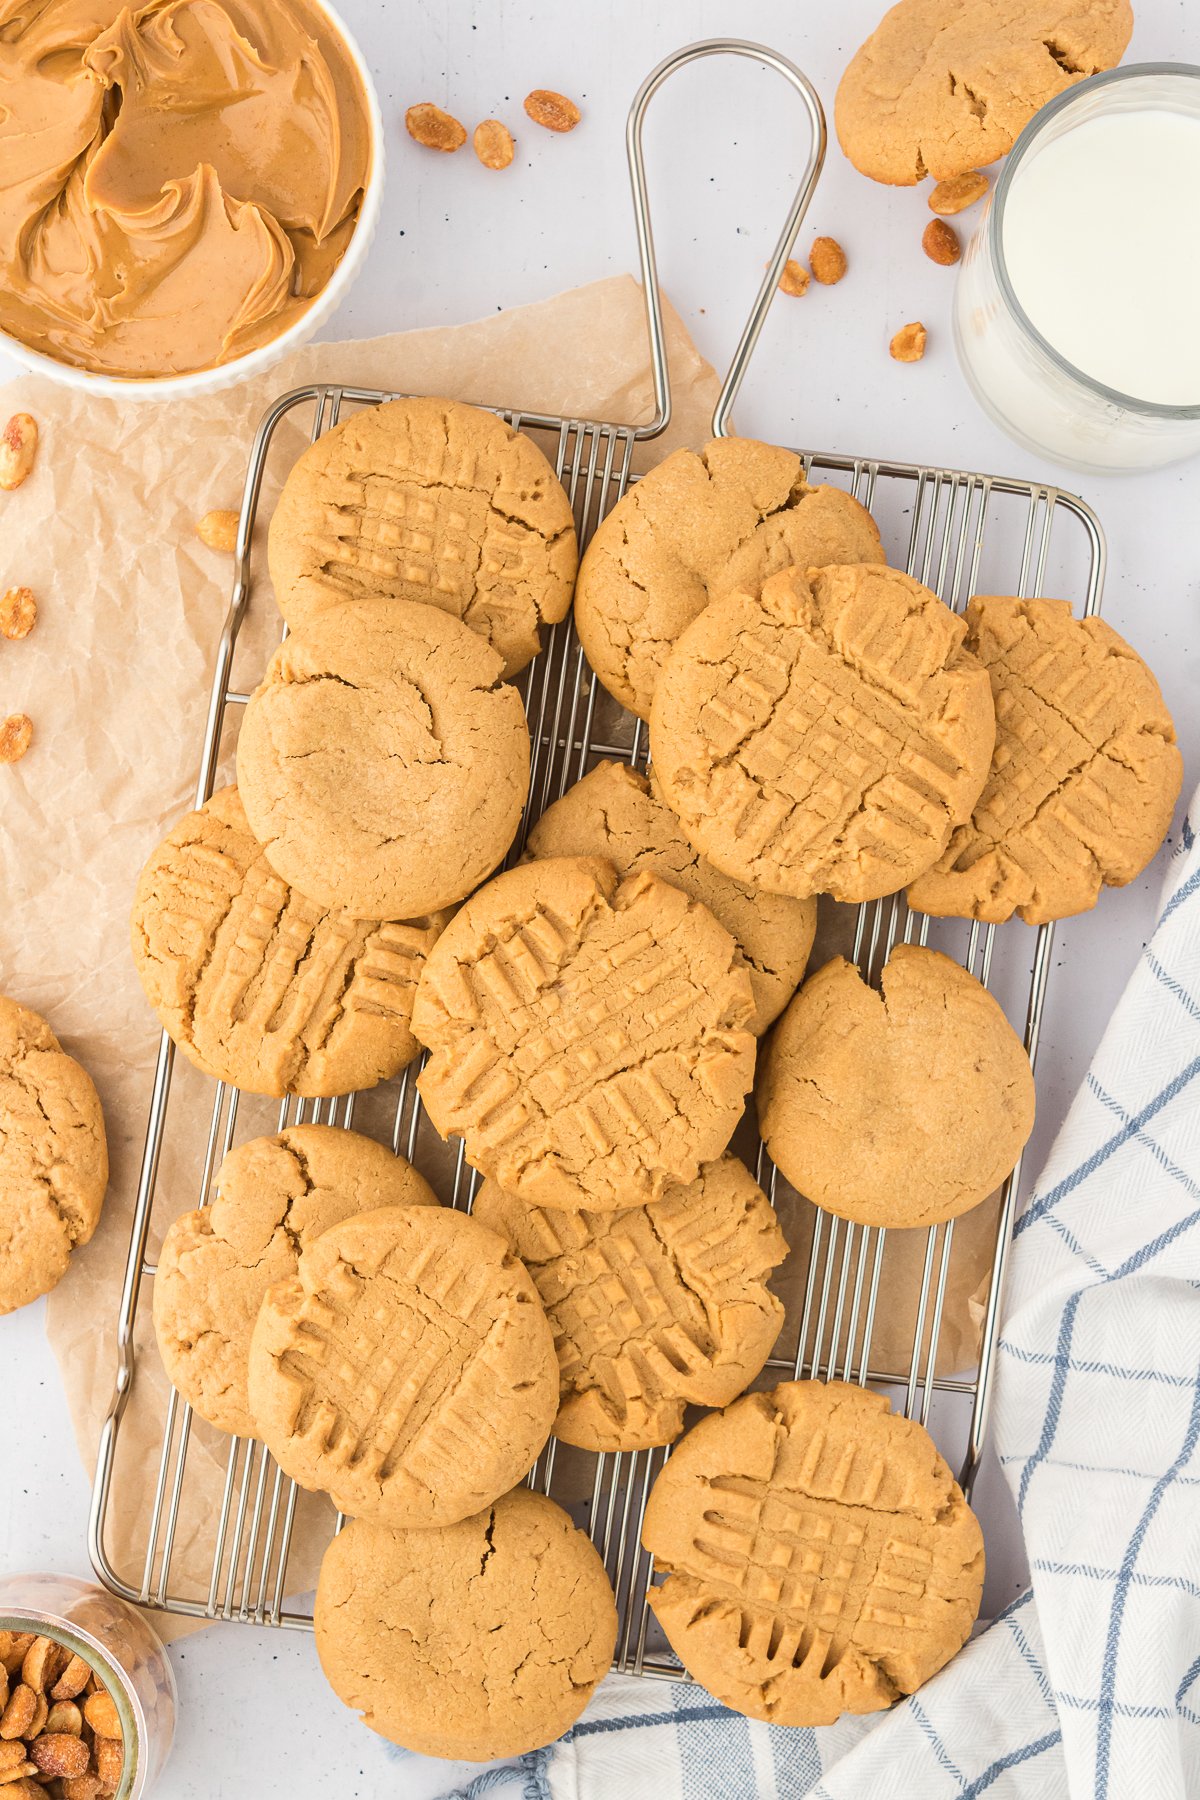 gluten free peanut butter cookies on a wire cooling rack surrounded by a white and blue striped kitchen towel, a bowl of peanuts, a bowl of peanut butter and a glass of milk